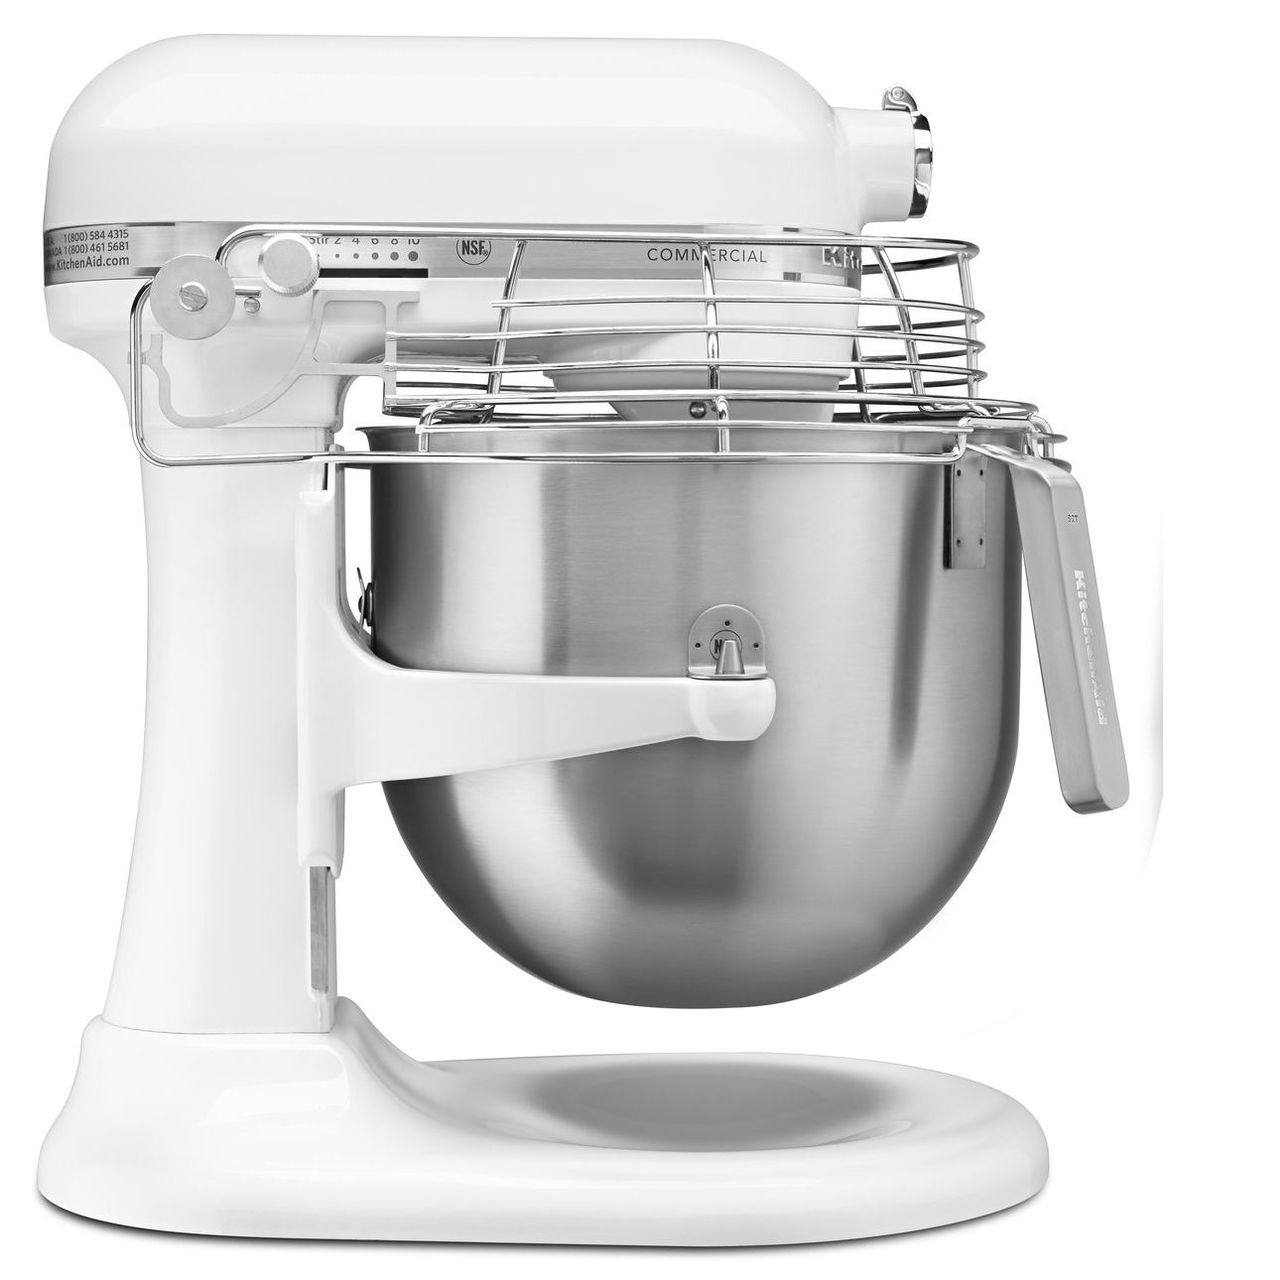 KitchenAid Commercial Series 8 Quart Bowl-Lift Stand Mixer with Stainless  Steel Bowl Guard (KSMC895 Series) - Plant Based Pros